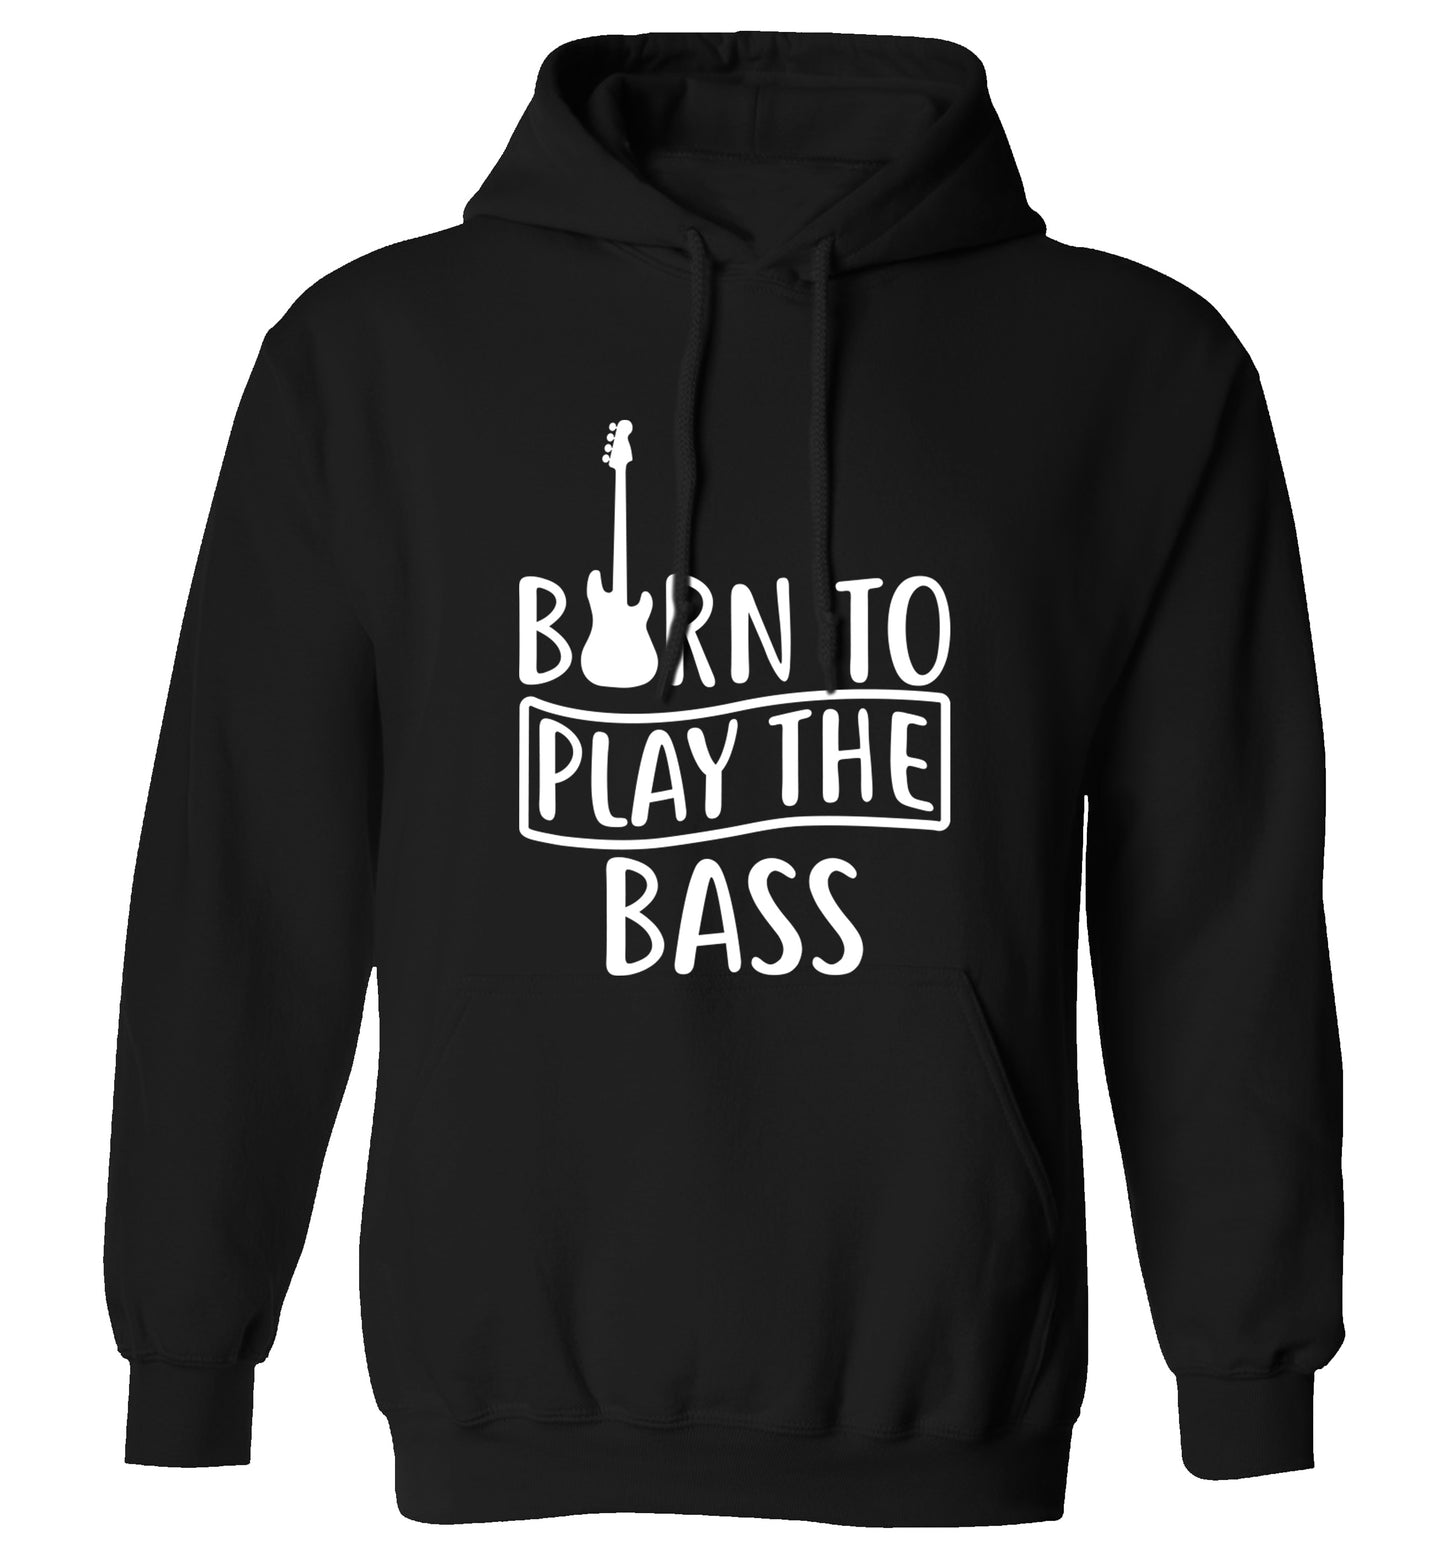 Born to play the bass adults unisex black hoodie 2XL